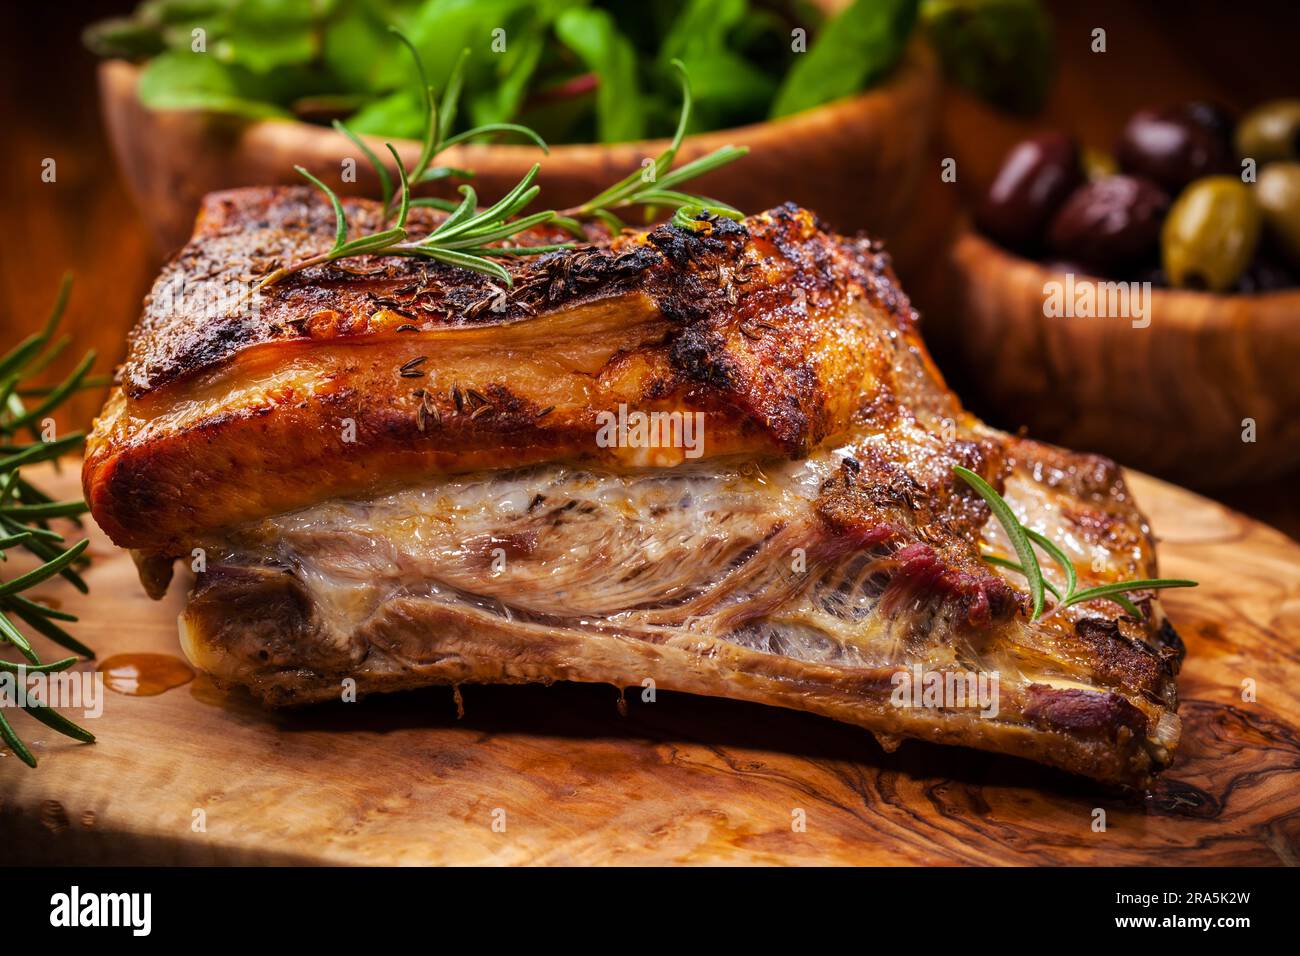 Roasted pork with salad and olives Stock Photo